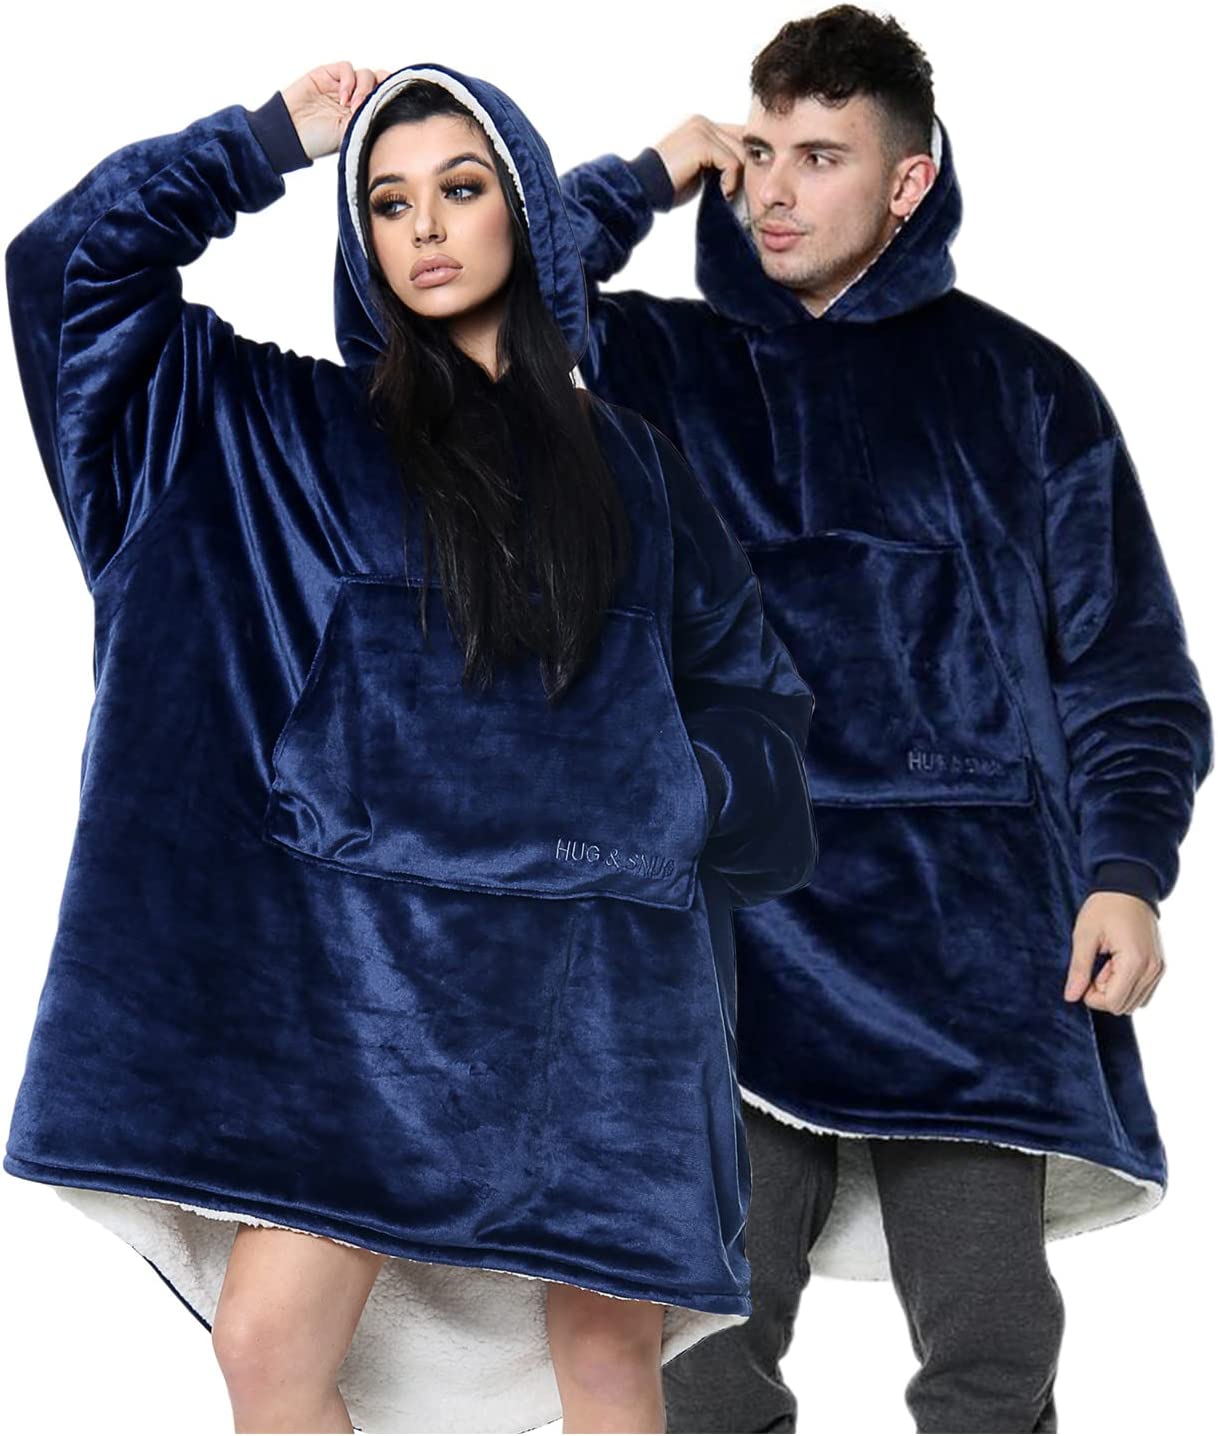 Chill out and Unwind by using a High quality Oversized hoodie blanket